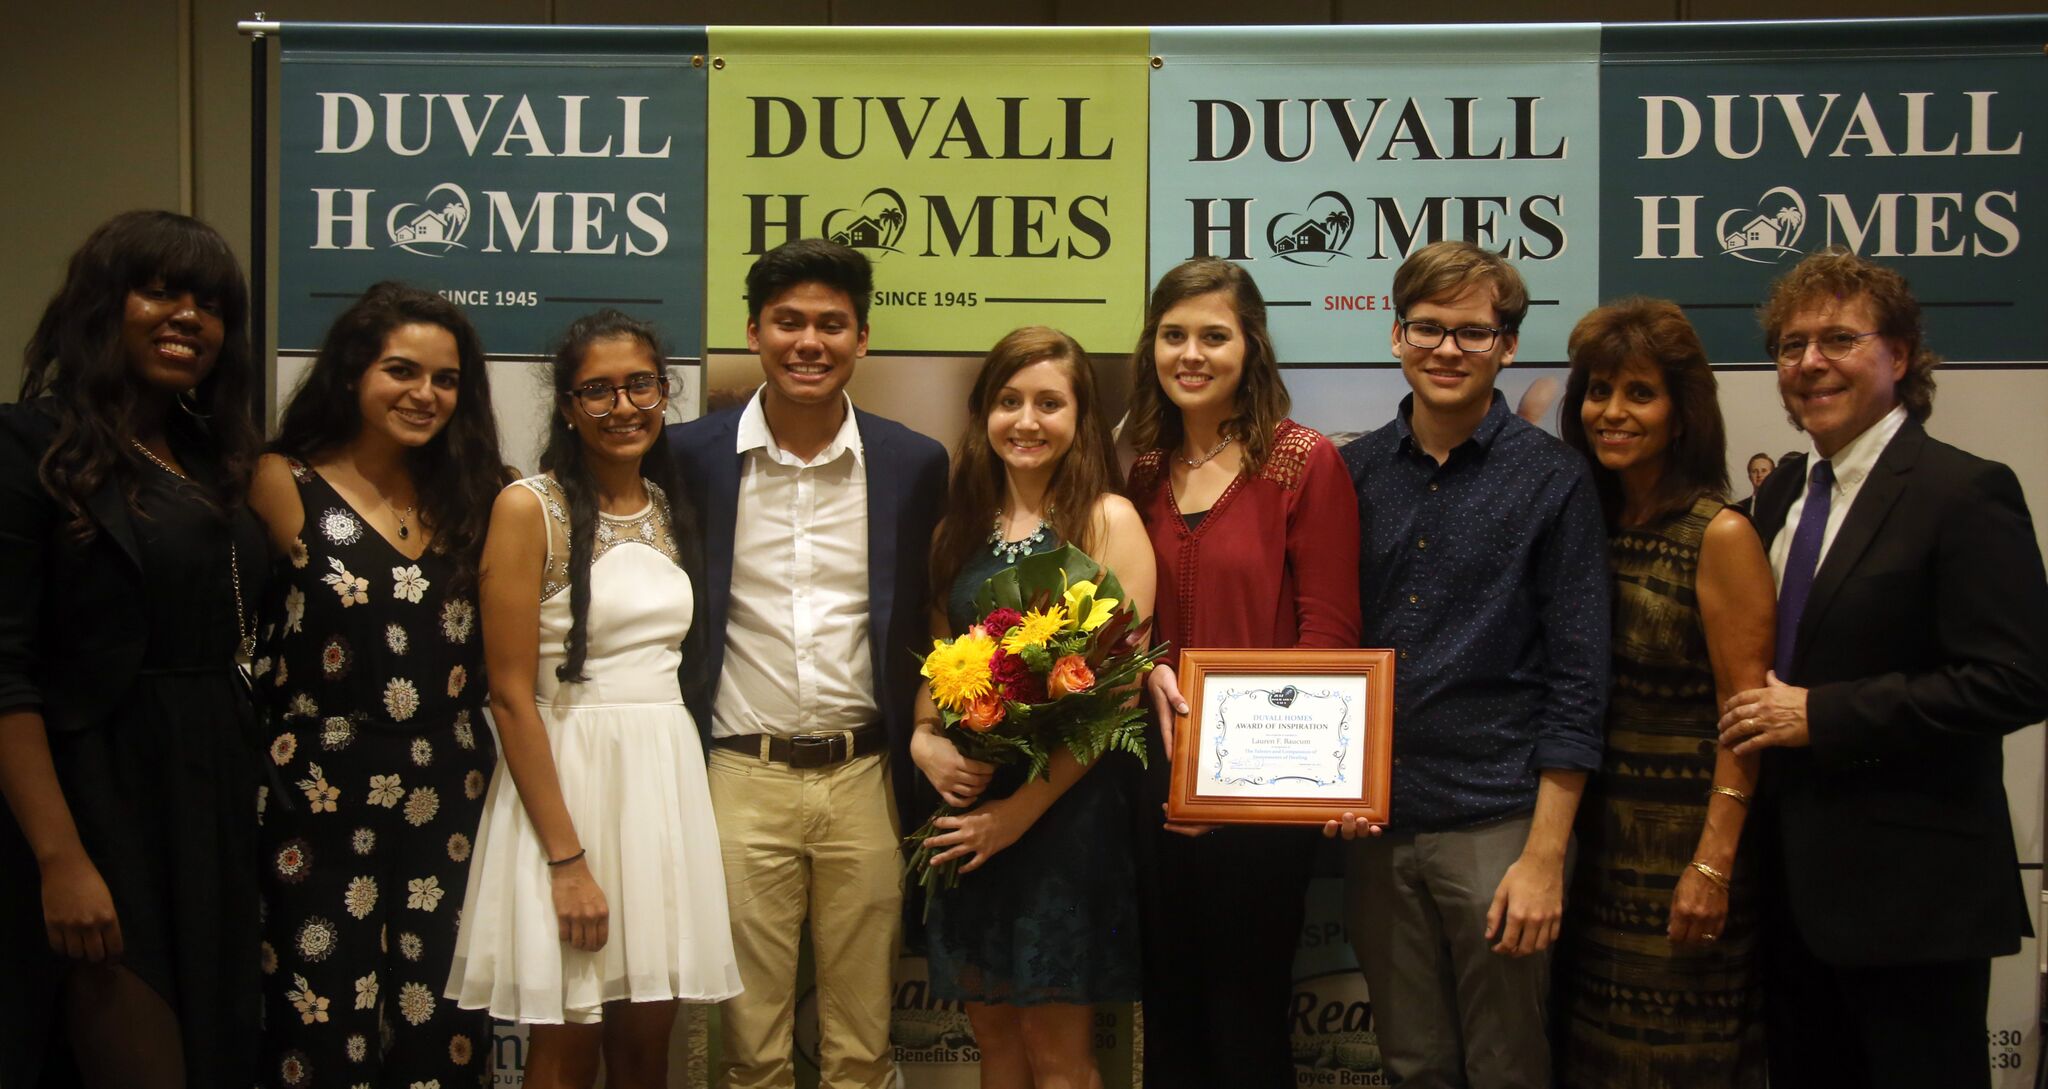 The students, the professor and his wife pose side by side with the framed certificate and a bouquet of flowers, and Duvall Homes printed logos behind them.